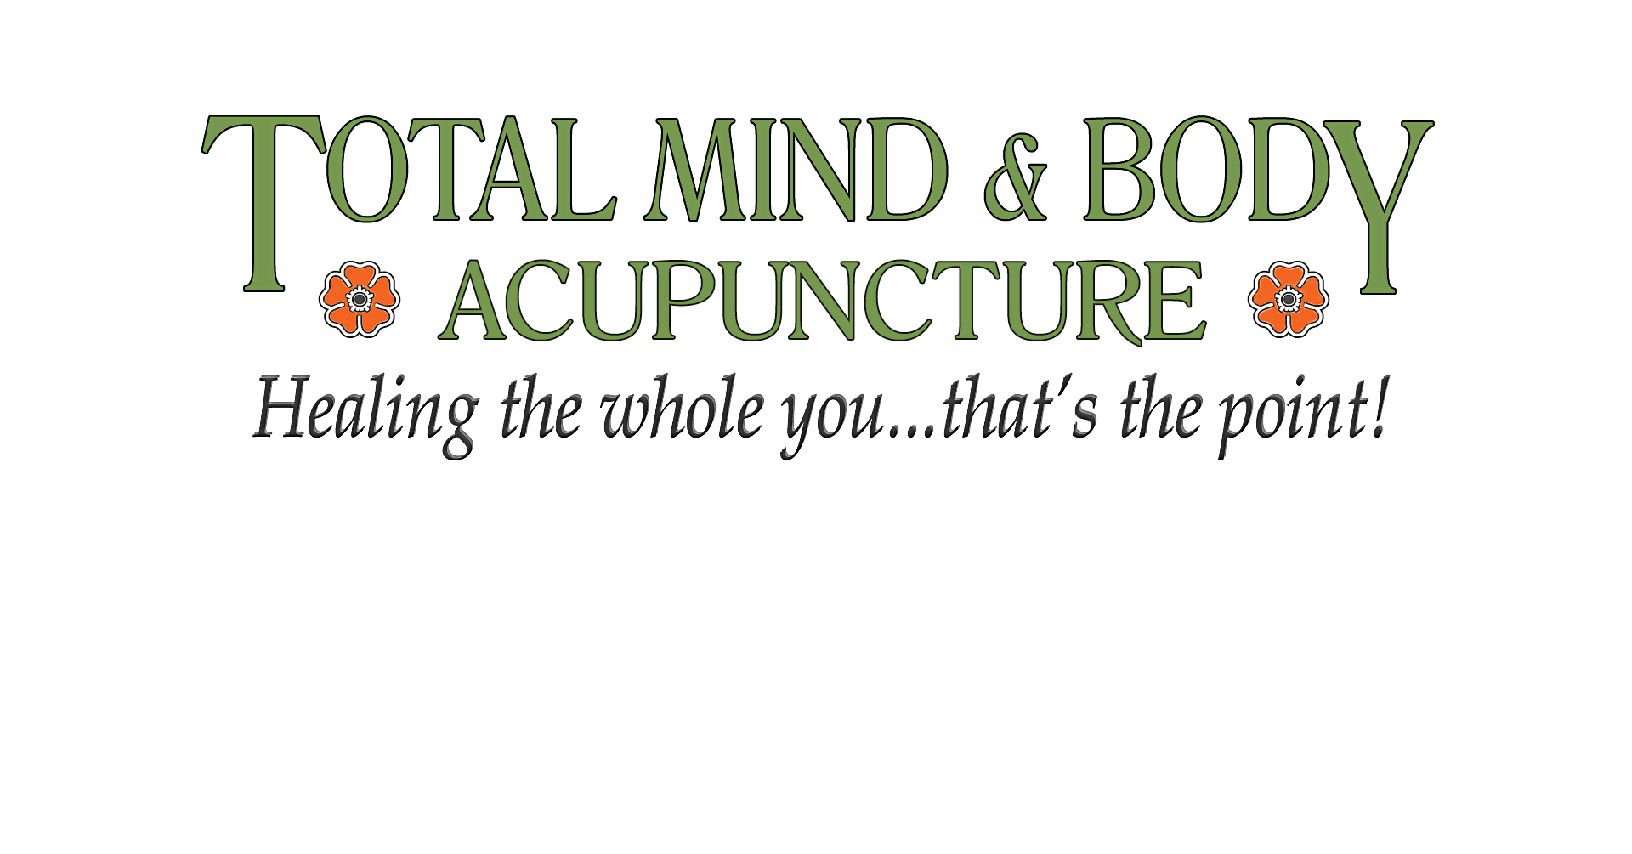 Total Mind & Body Acupuncture